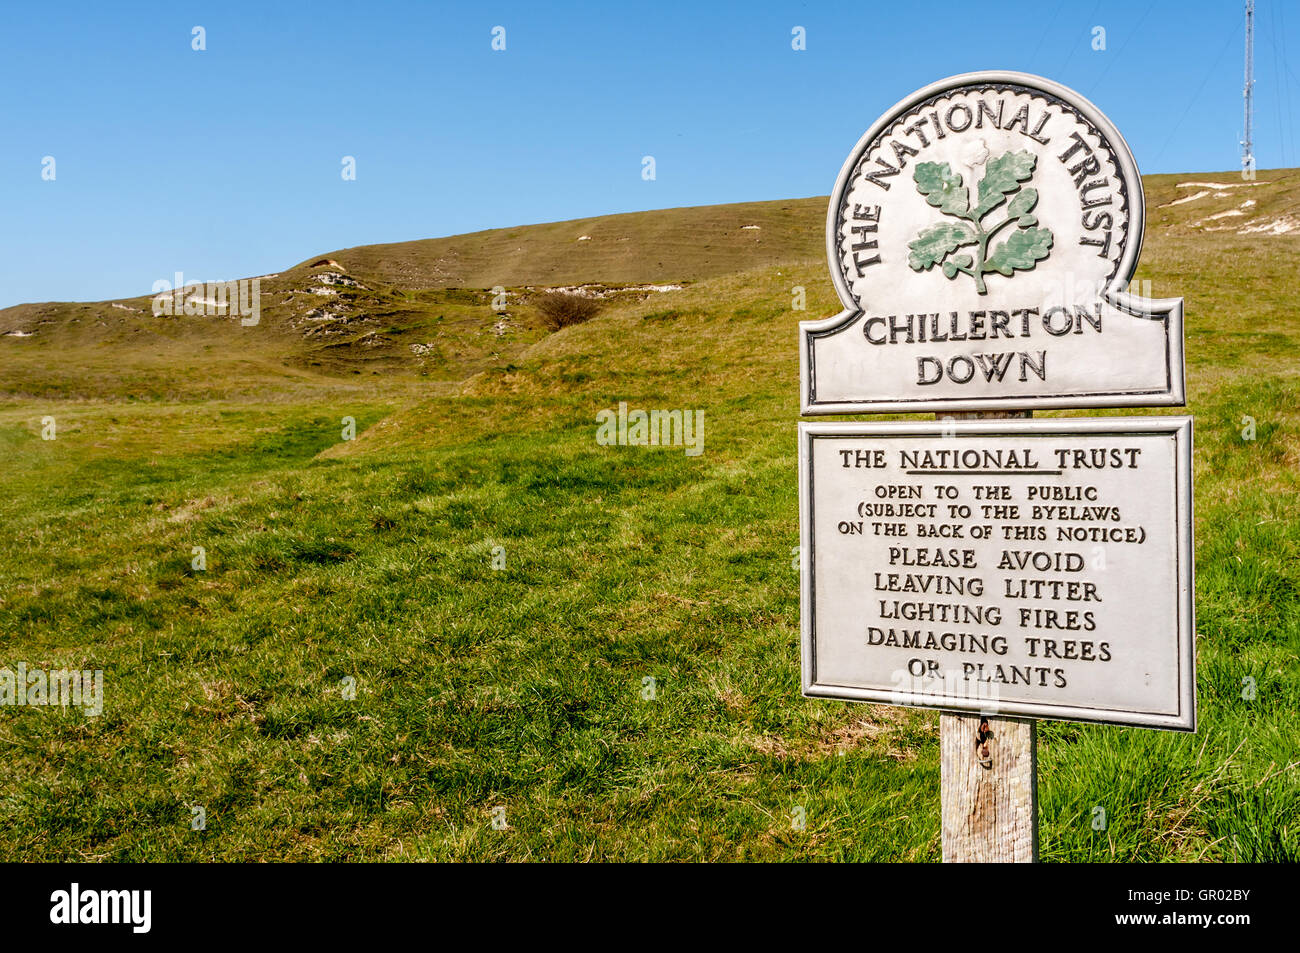 Walking over Chillerton Down on the Isle of Wight. Stock Photo